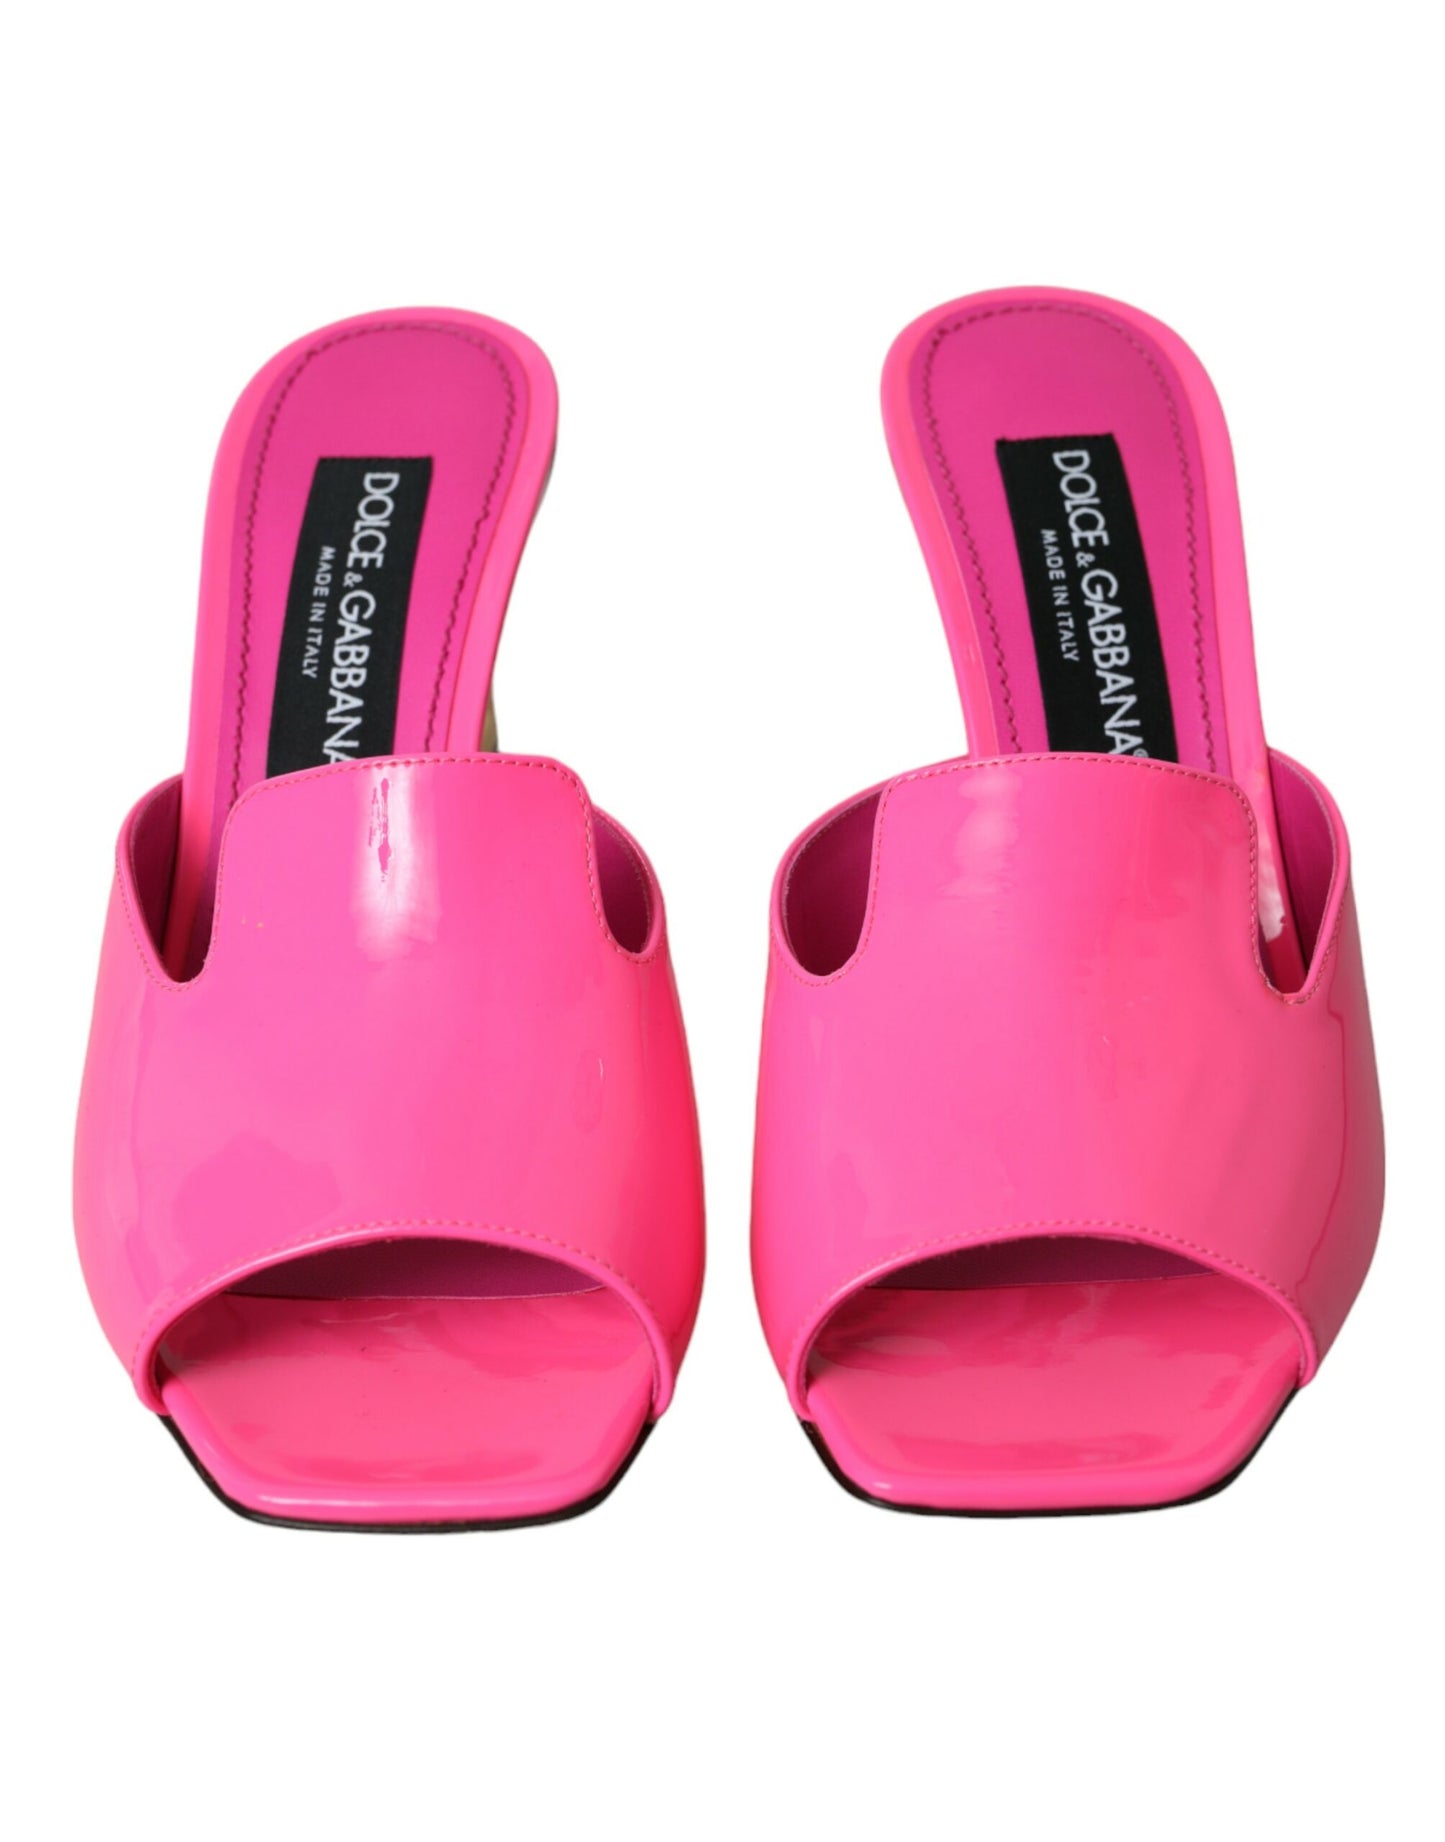 Dolce & Gabbana Neon Pink Leather Logo Heels Sandals Shoes